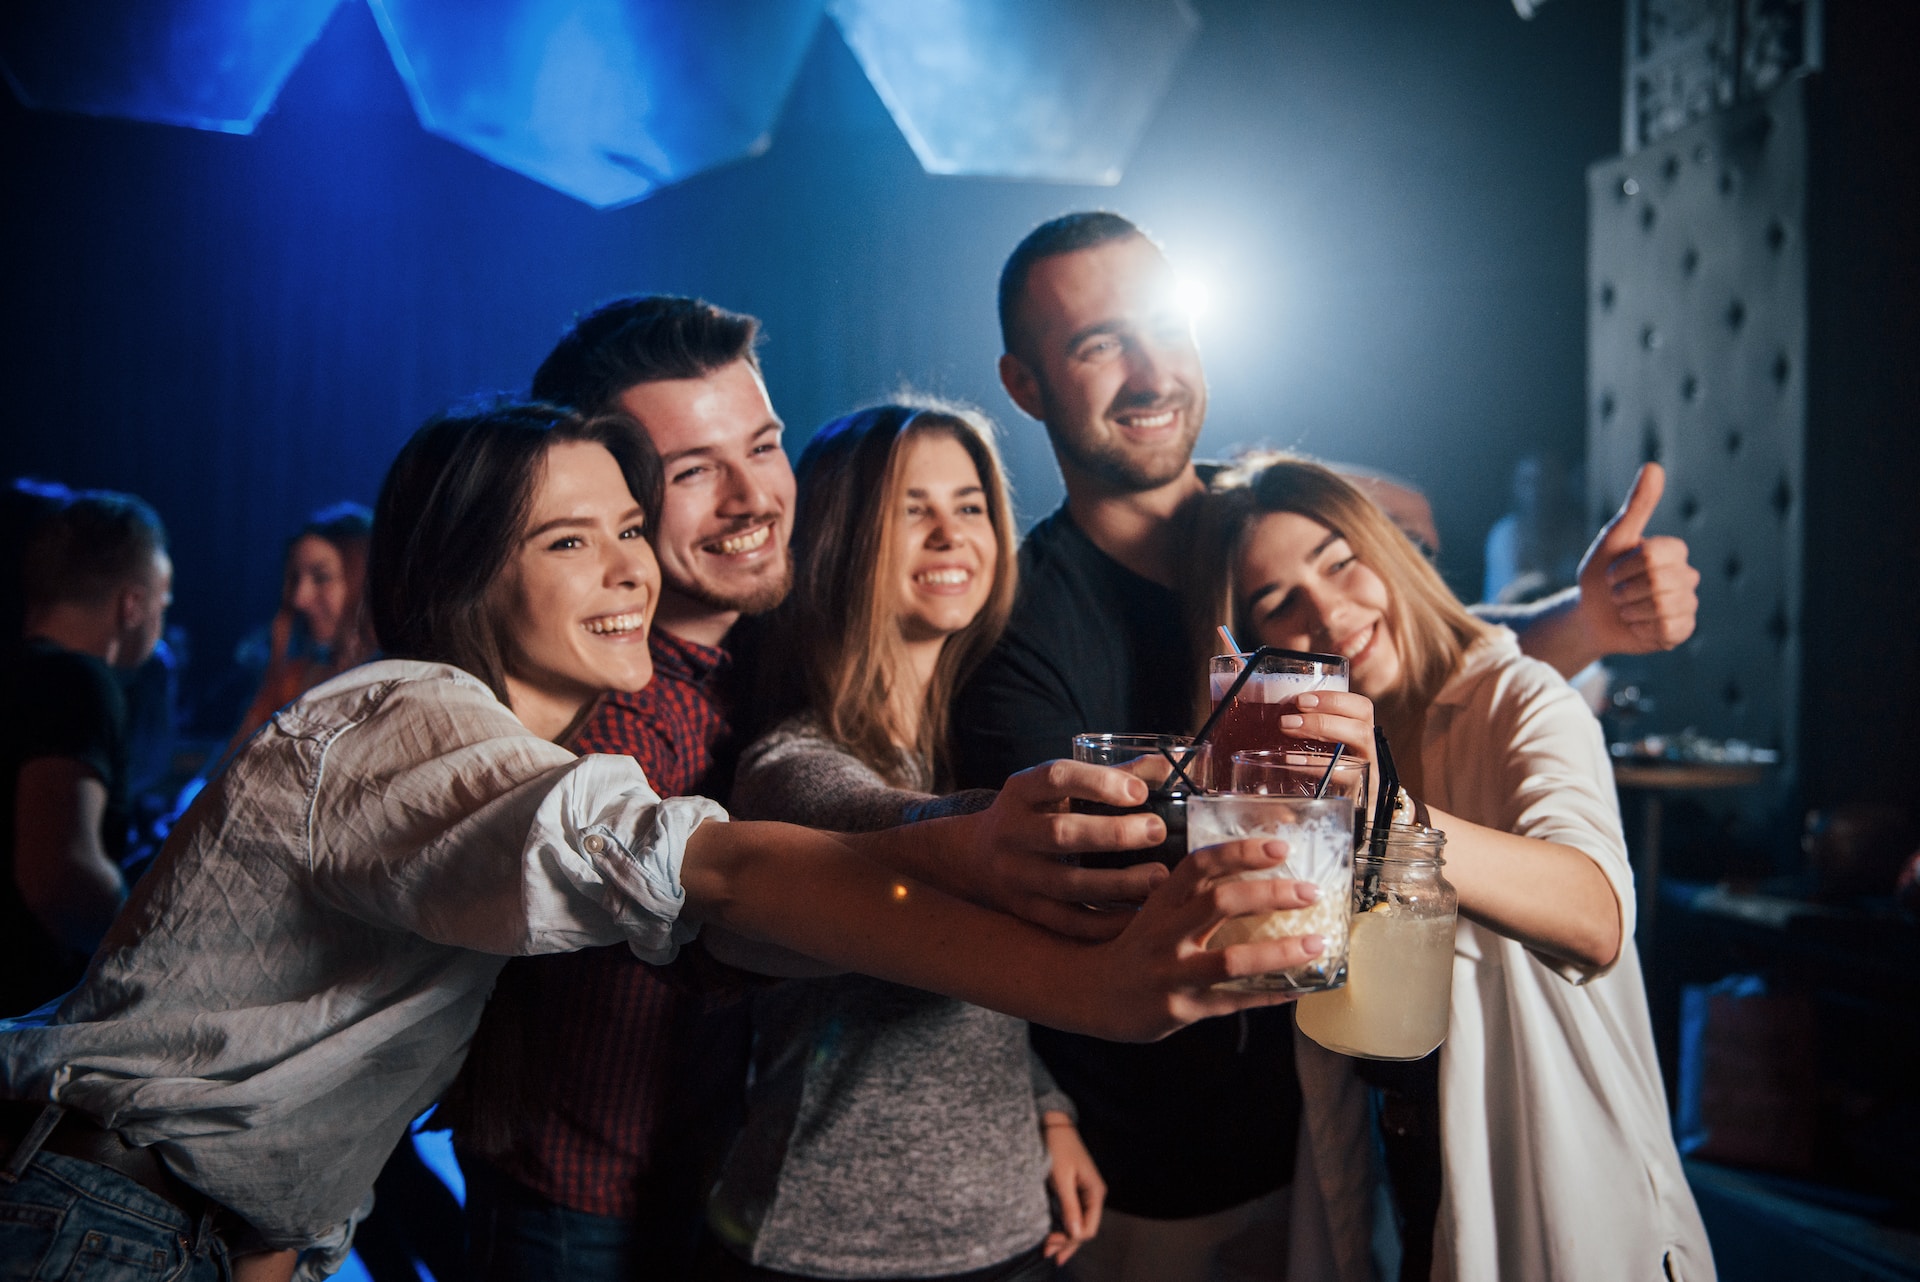 people with drinks at a nightclub